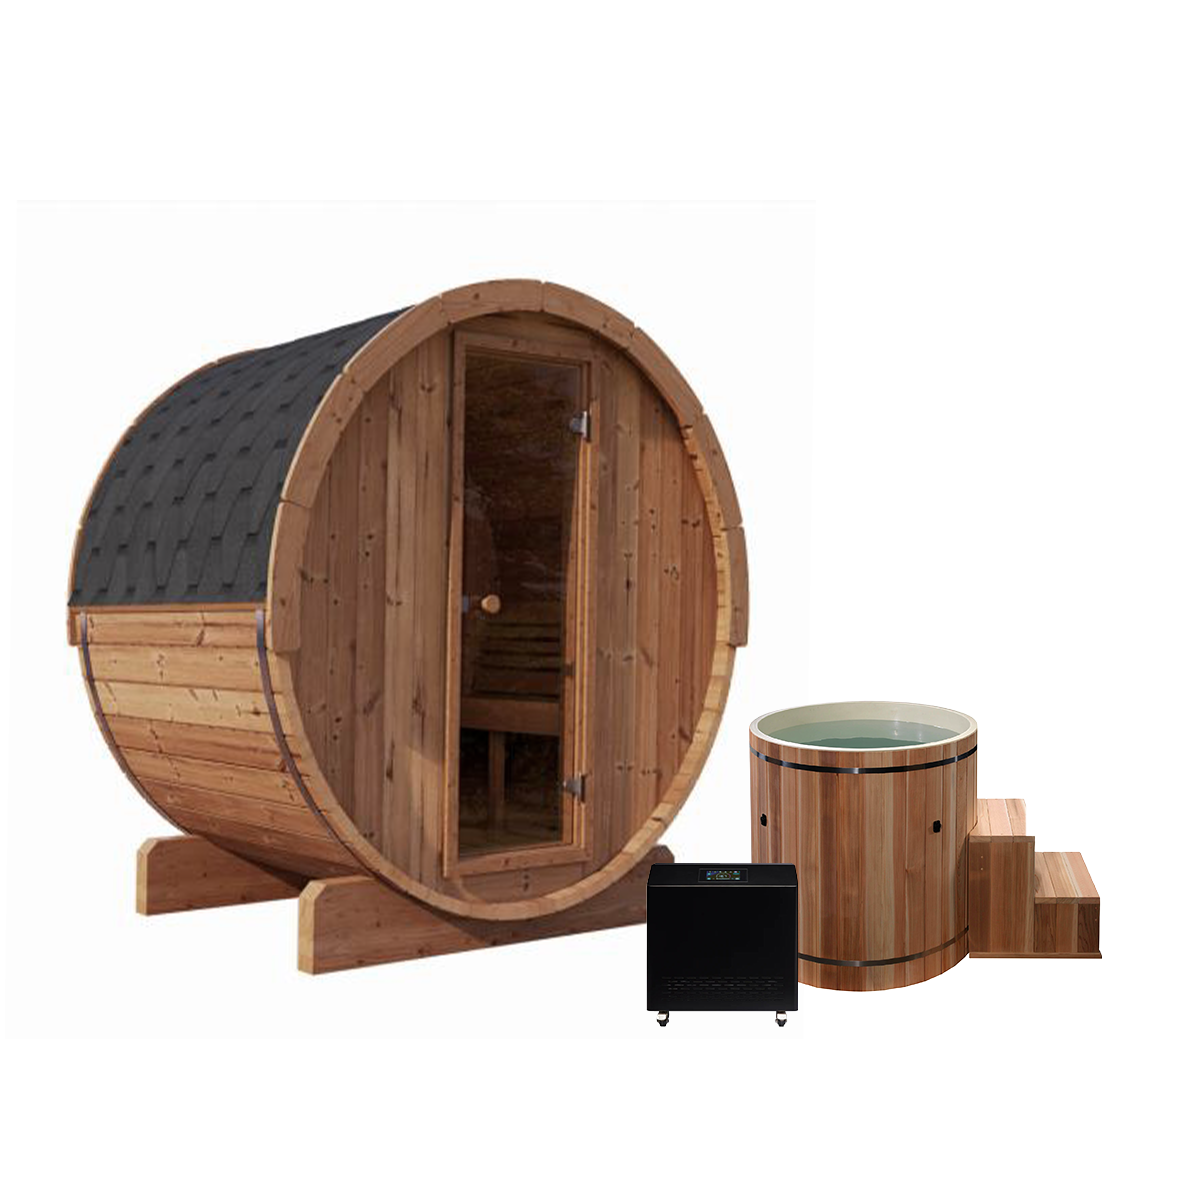 Forever  Saunas 2 person Thermally Treated Outdoor Barrel Sauna Detox Package